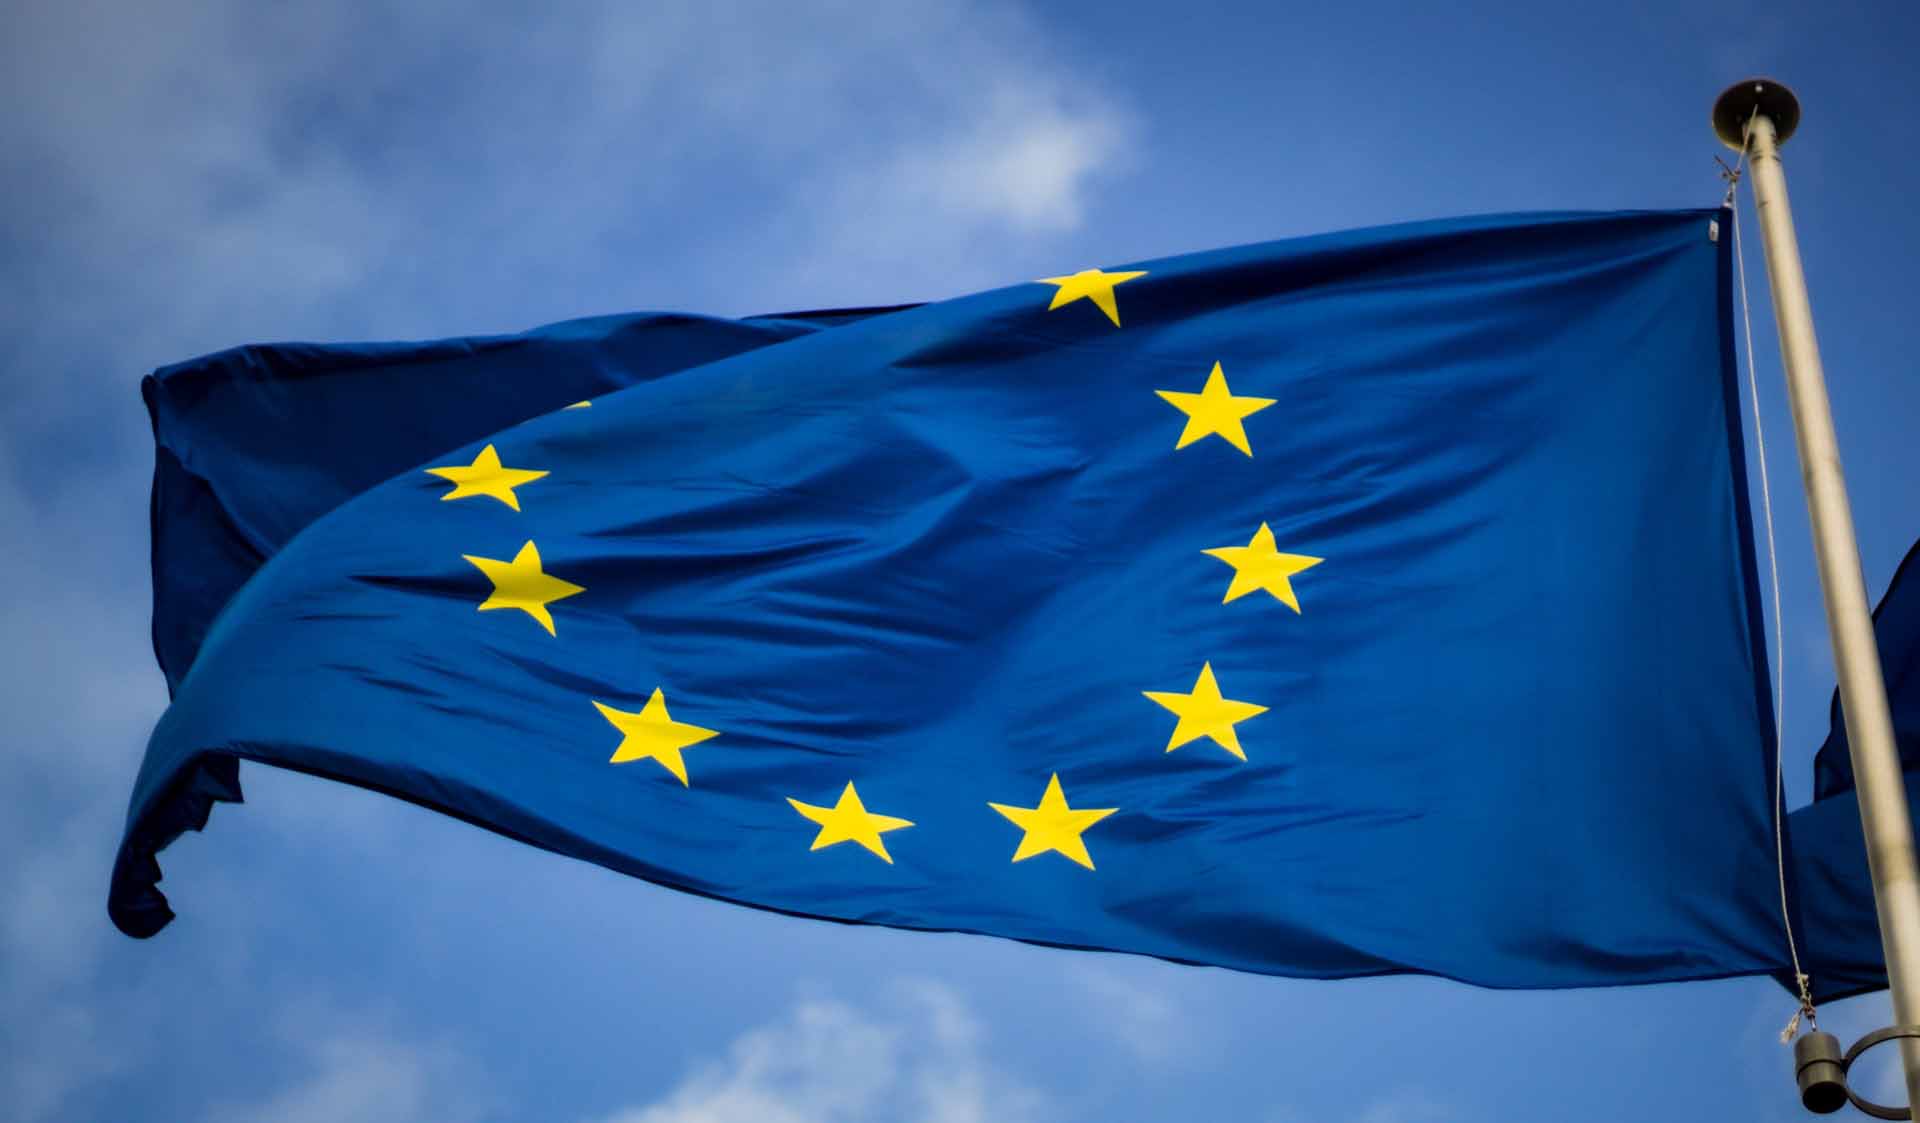 The E.U. agrees to reopen to vaccinated visitors and those from Covid-safe countries.